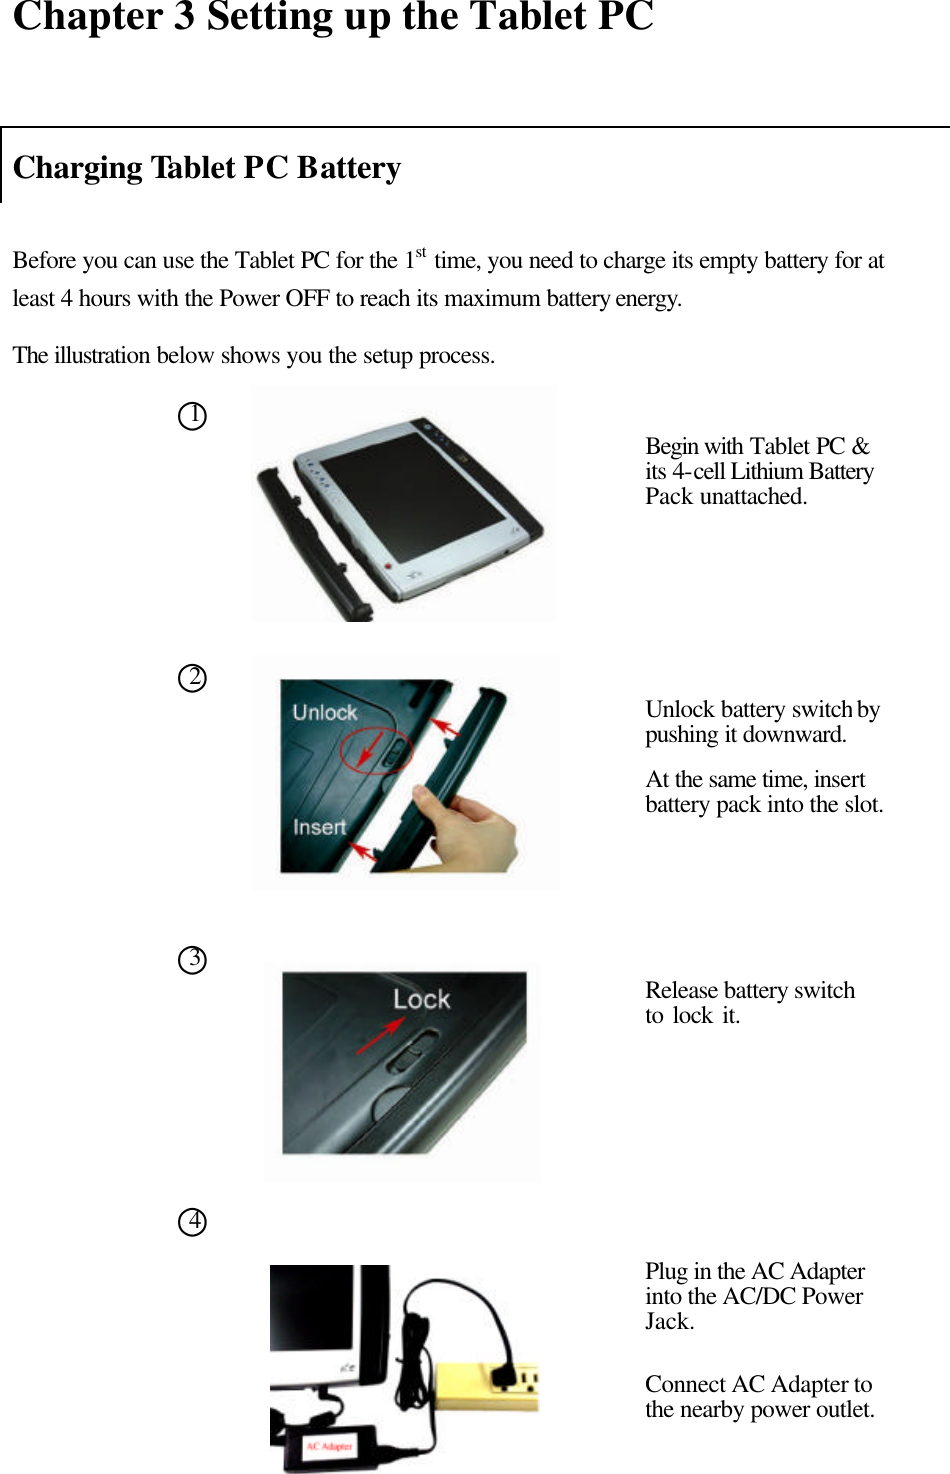  Chapter 3 Setting up the Tablet PC   Charging Tablet PC Battery  Before you can use the Tablet PC for the 1st time, you need to charge its empty battery for at least 4 hours with the Power OFF to reach its maximum battery energy.   The illustration below shows you the setup process.                               ○1Begin with Tablet PC &amp; its 4-cell Lithium Battery Pack unattached.   ○2 Unlock battery switch by pushing it downward.   At the same time, insert battery pack into the slot. ○3 Release battery switch to lock it.   ○4 Plug in the AC Adapter into the AC/DC Power Jack.    Connect AC Adapter to the nearby power outlet.  